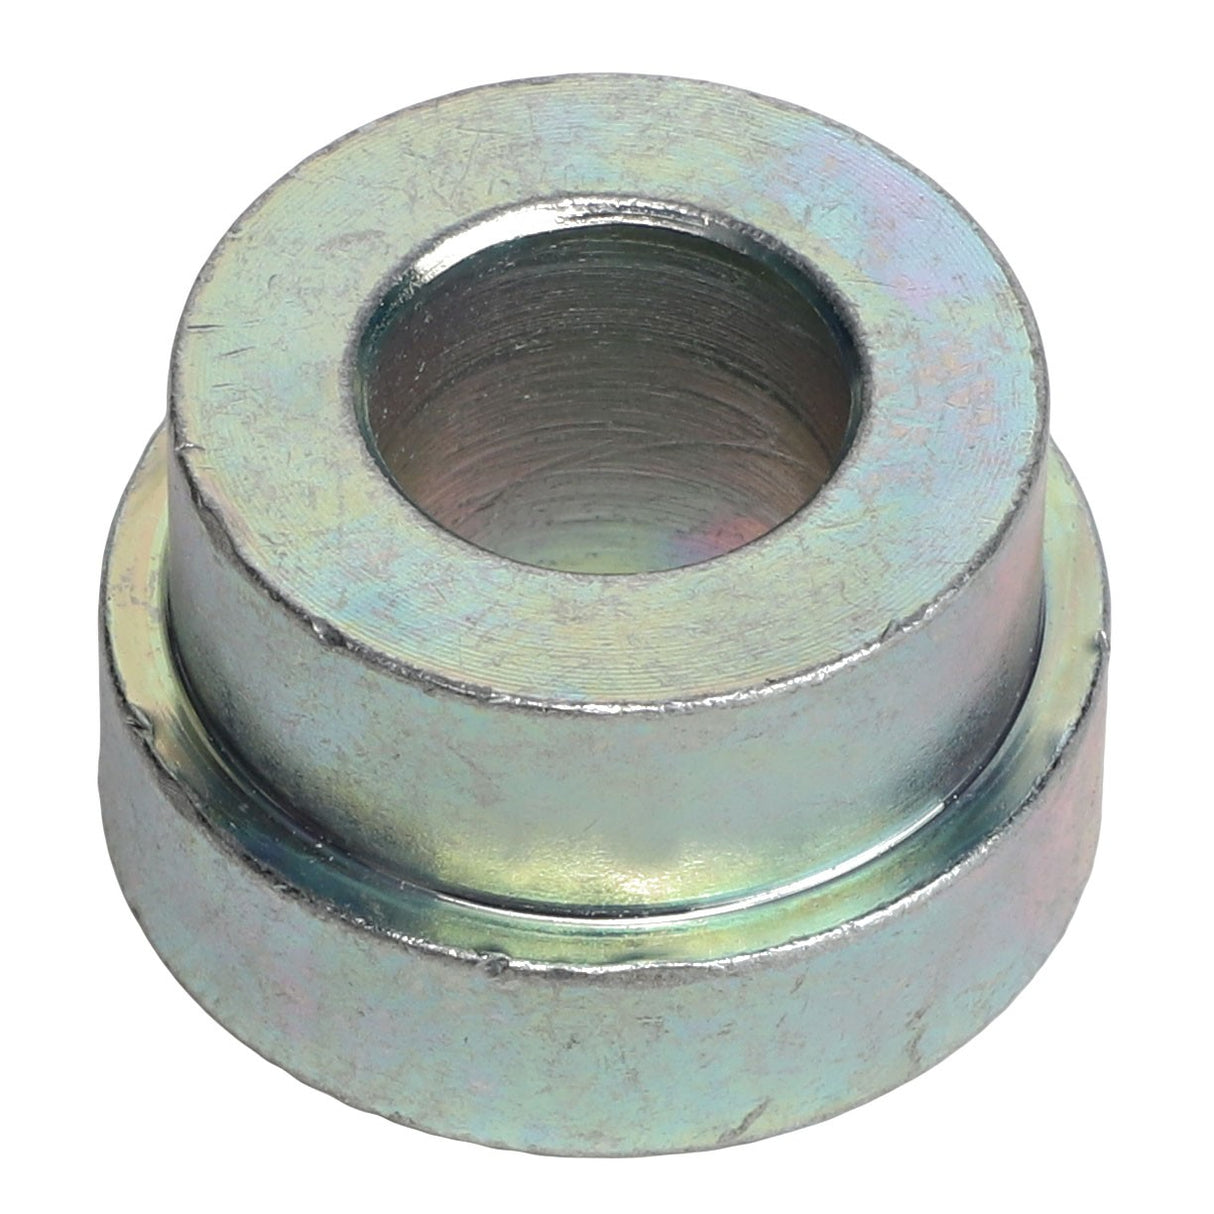 AGCO | Idler Spacer - Acx2788920 - Farming Parts